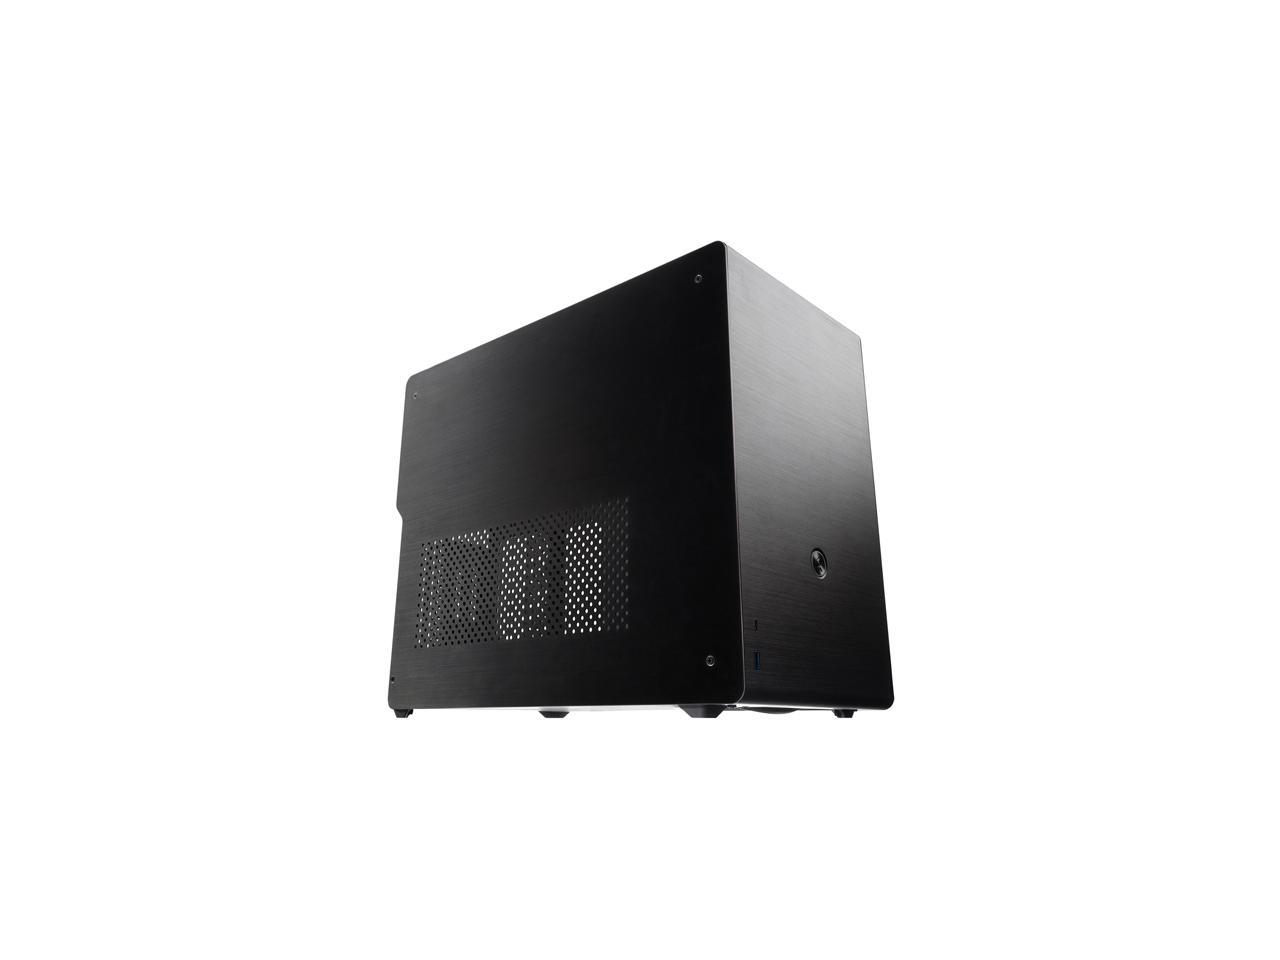 OPHION M EVO ALS, a SFF chassis (m-ATX) with Solid Alu. side panel, is designed to fulfill a smallest case built with max.Possibility high-end, gaming and standard components.